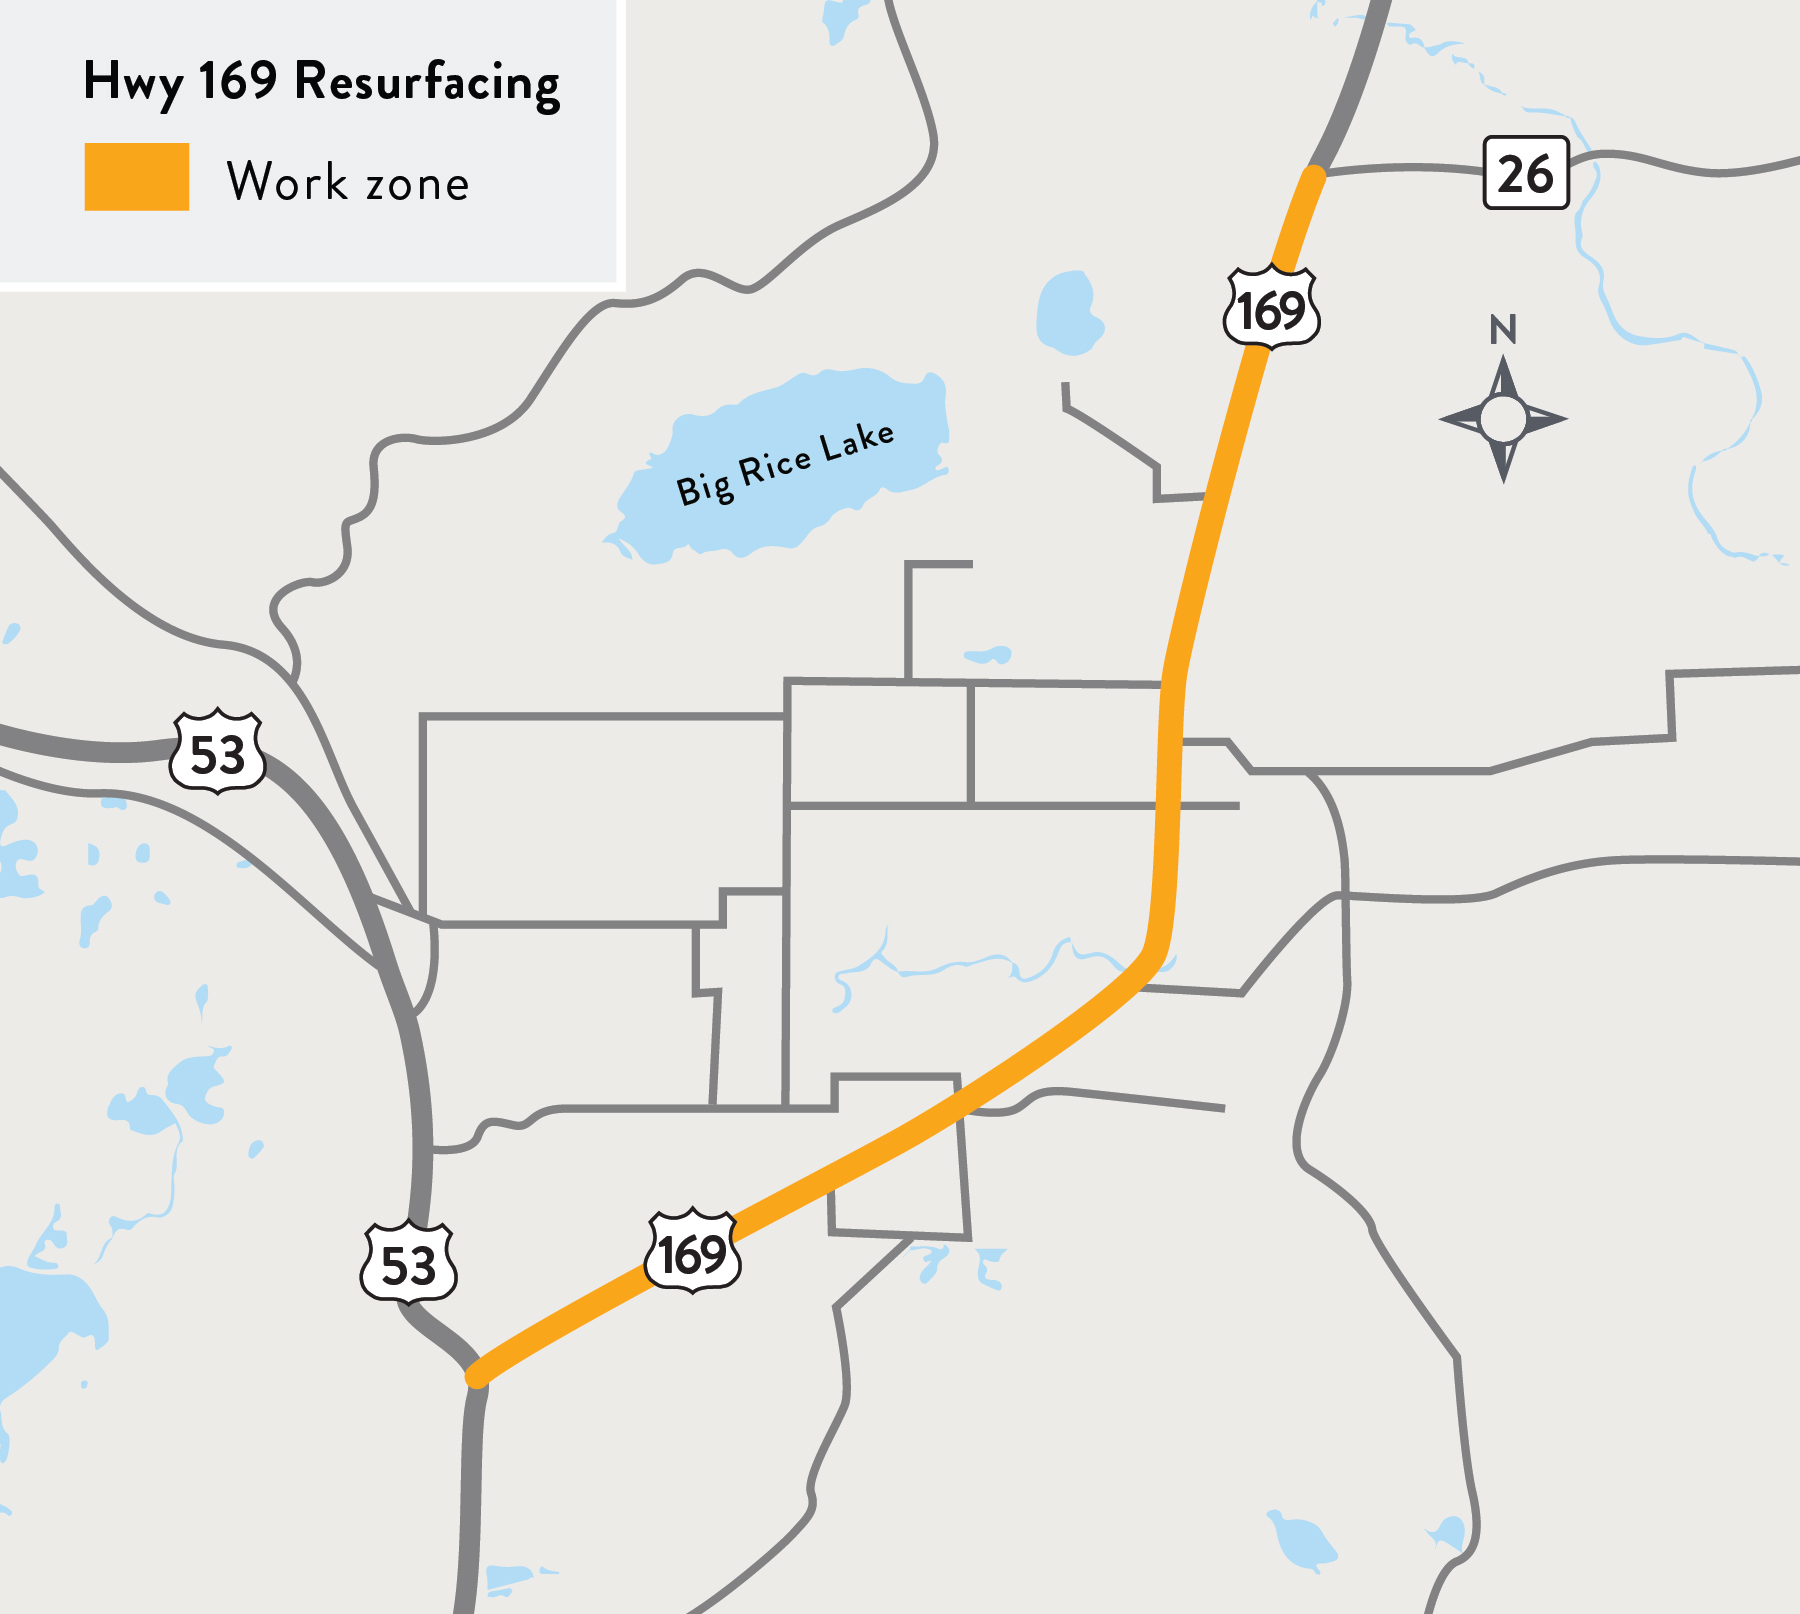 A map of the Hwy 169 resurfacing project area on Hwy 169 between Hwy 53 and Hwy 26